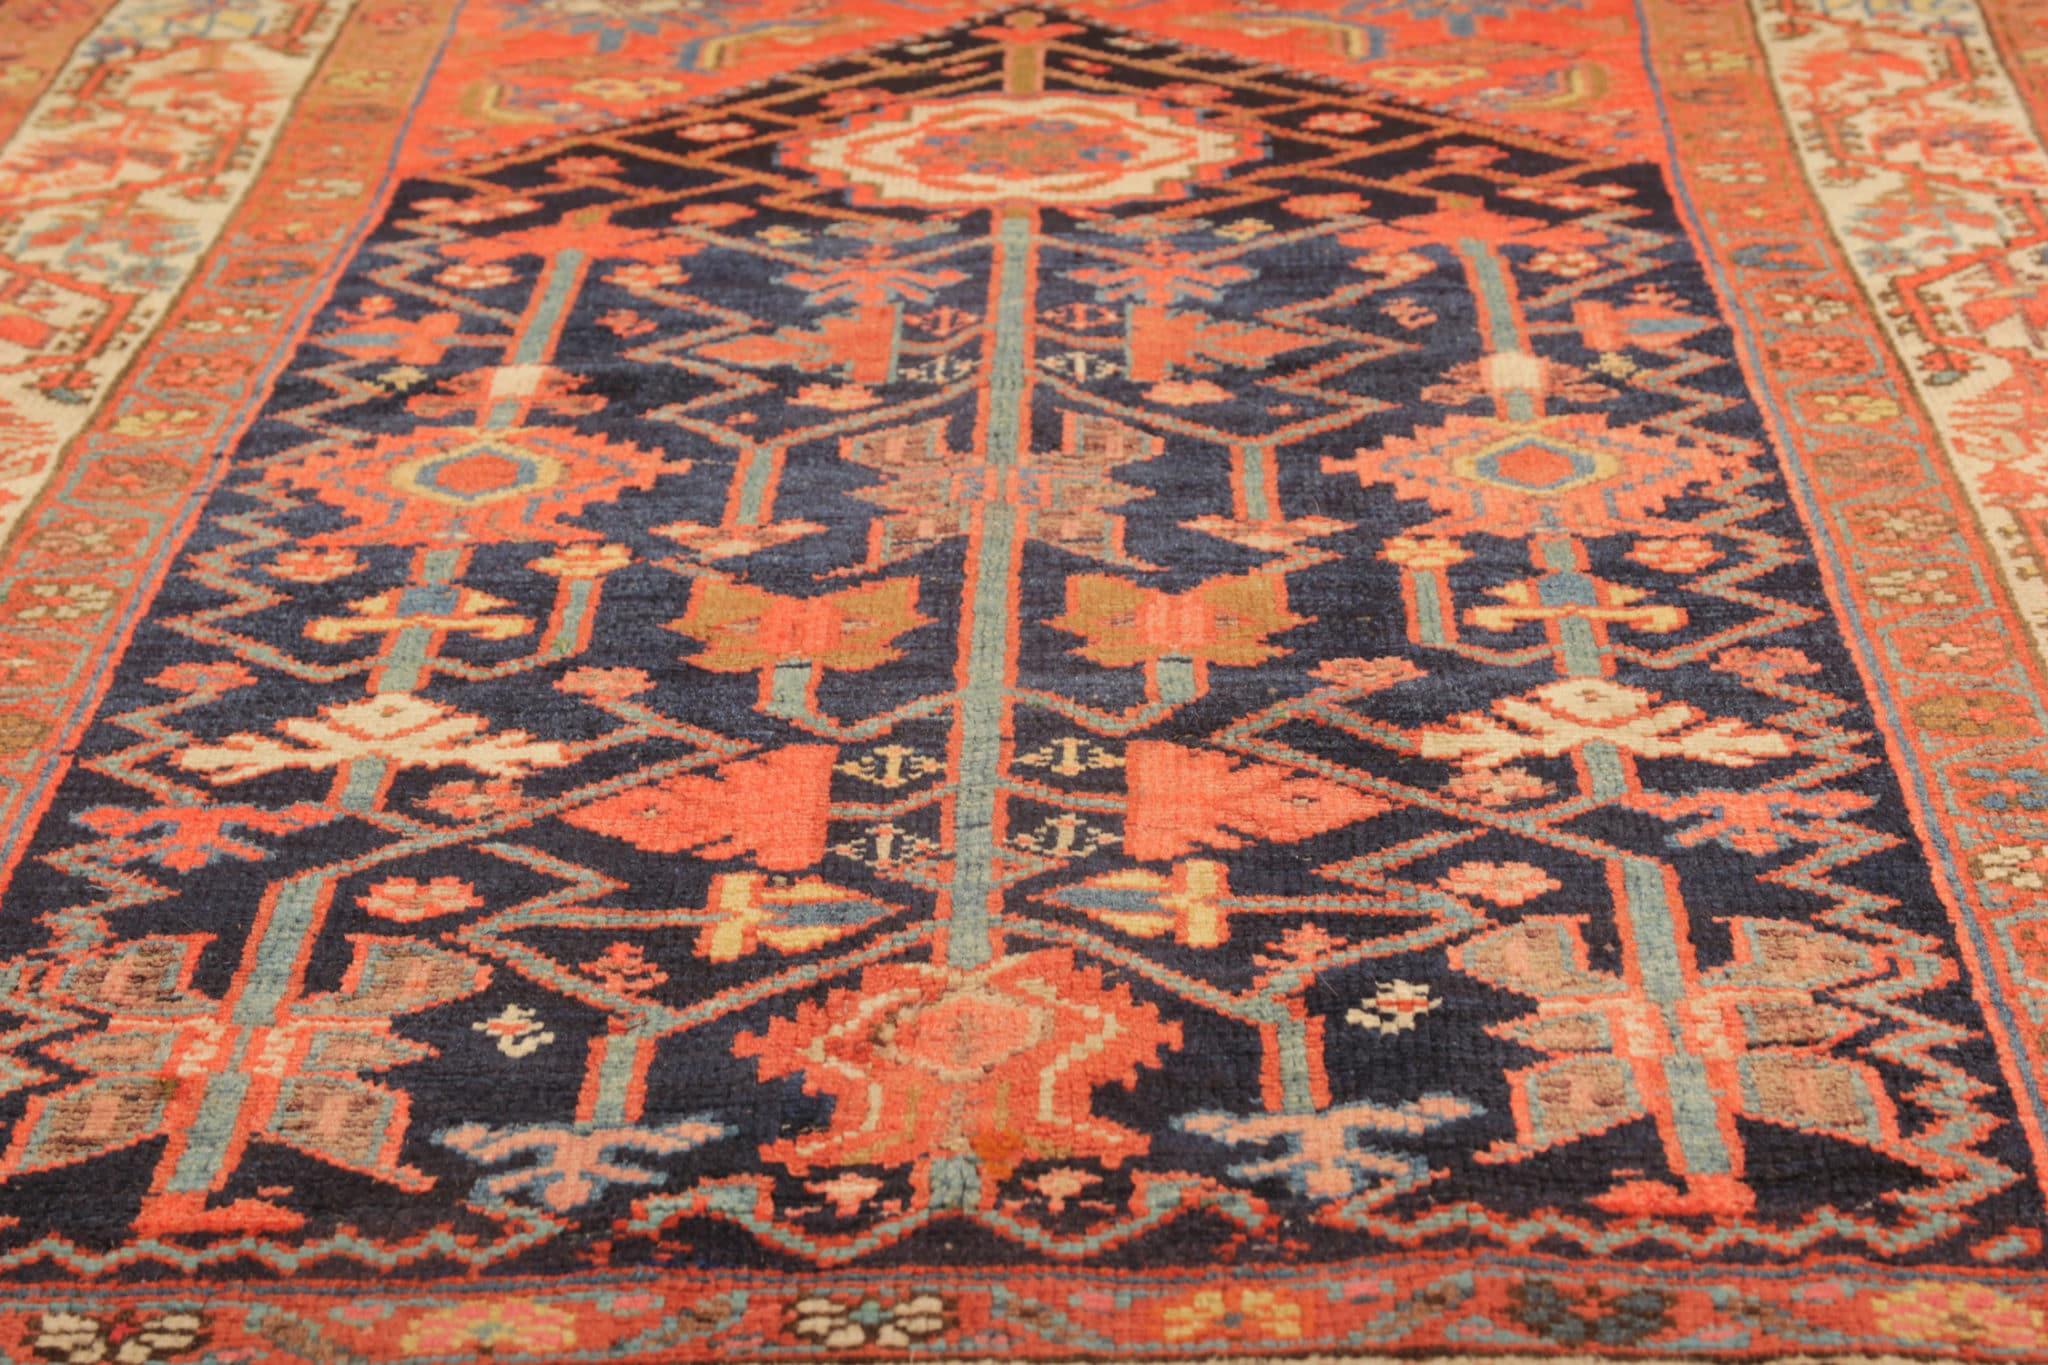 Transform your space with the timeless allure of our antique Caucasian Mihrabi rug. Crafted by skilled artisans in the late 1880s, this exquisite piece exudes the rich history of the Caucasus region, specifically Shirvan and Kazak areas.